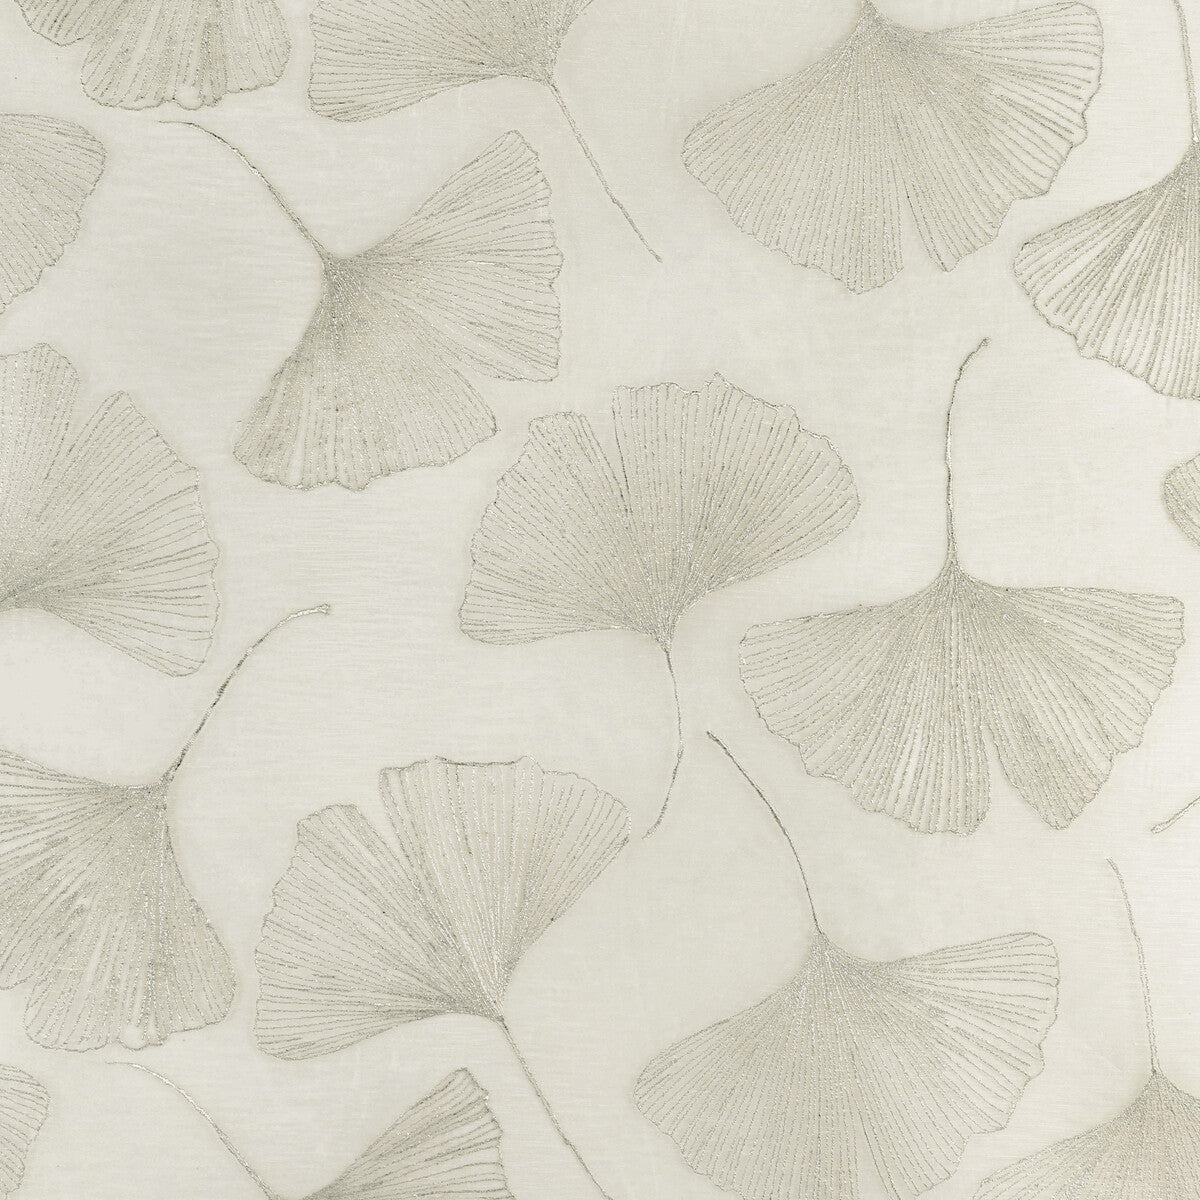 Gingko Leaf fabric in platinum color - pattern 4949.1101.0 - by Kravet Couture in the Modern Luxe Silk Luster collection